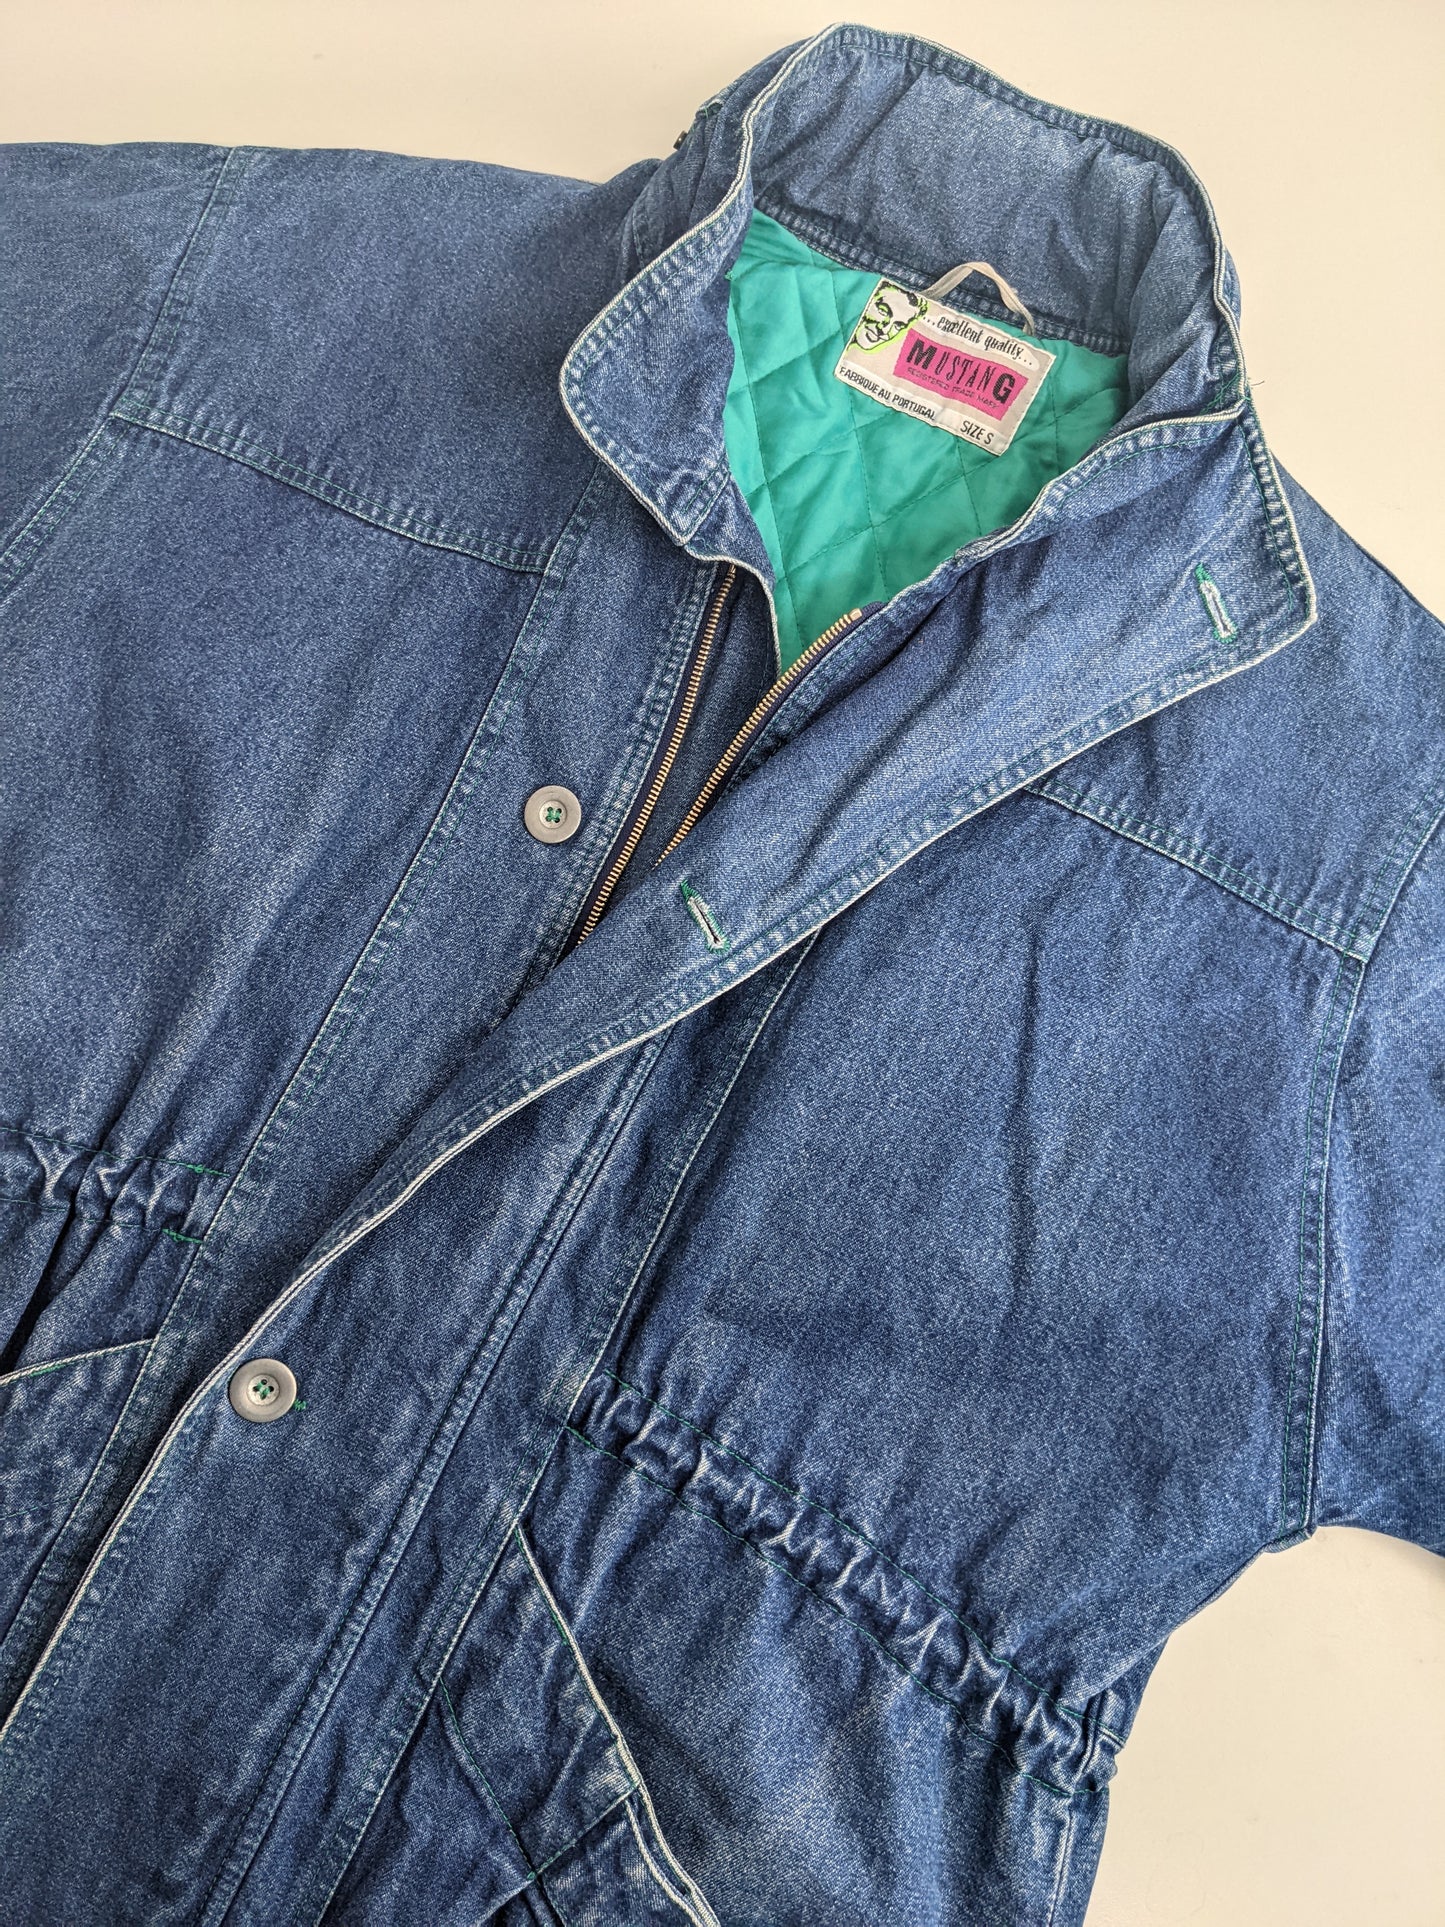 90s Mustang Jeans Jacket Blue  M